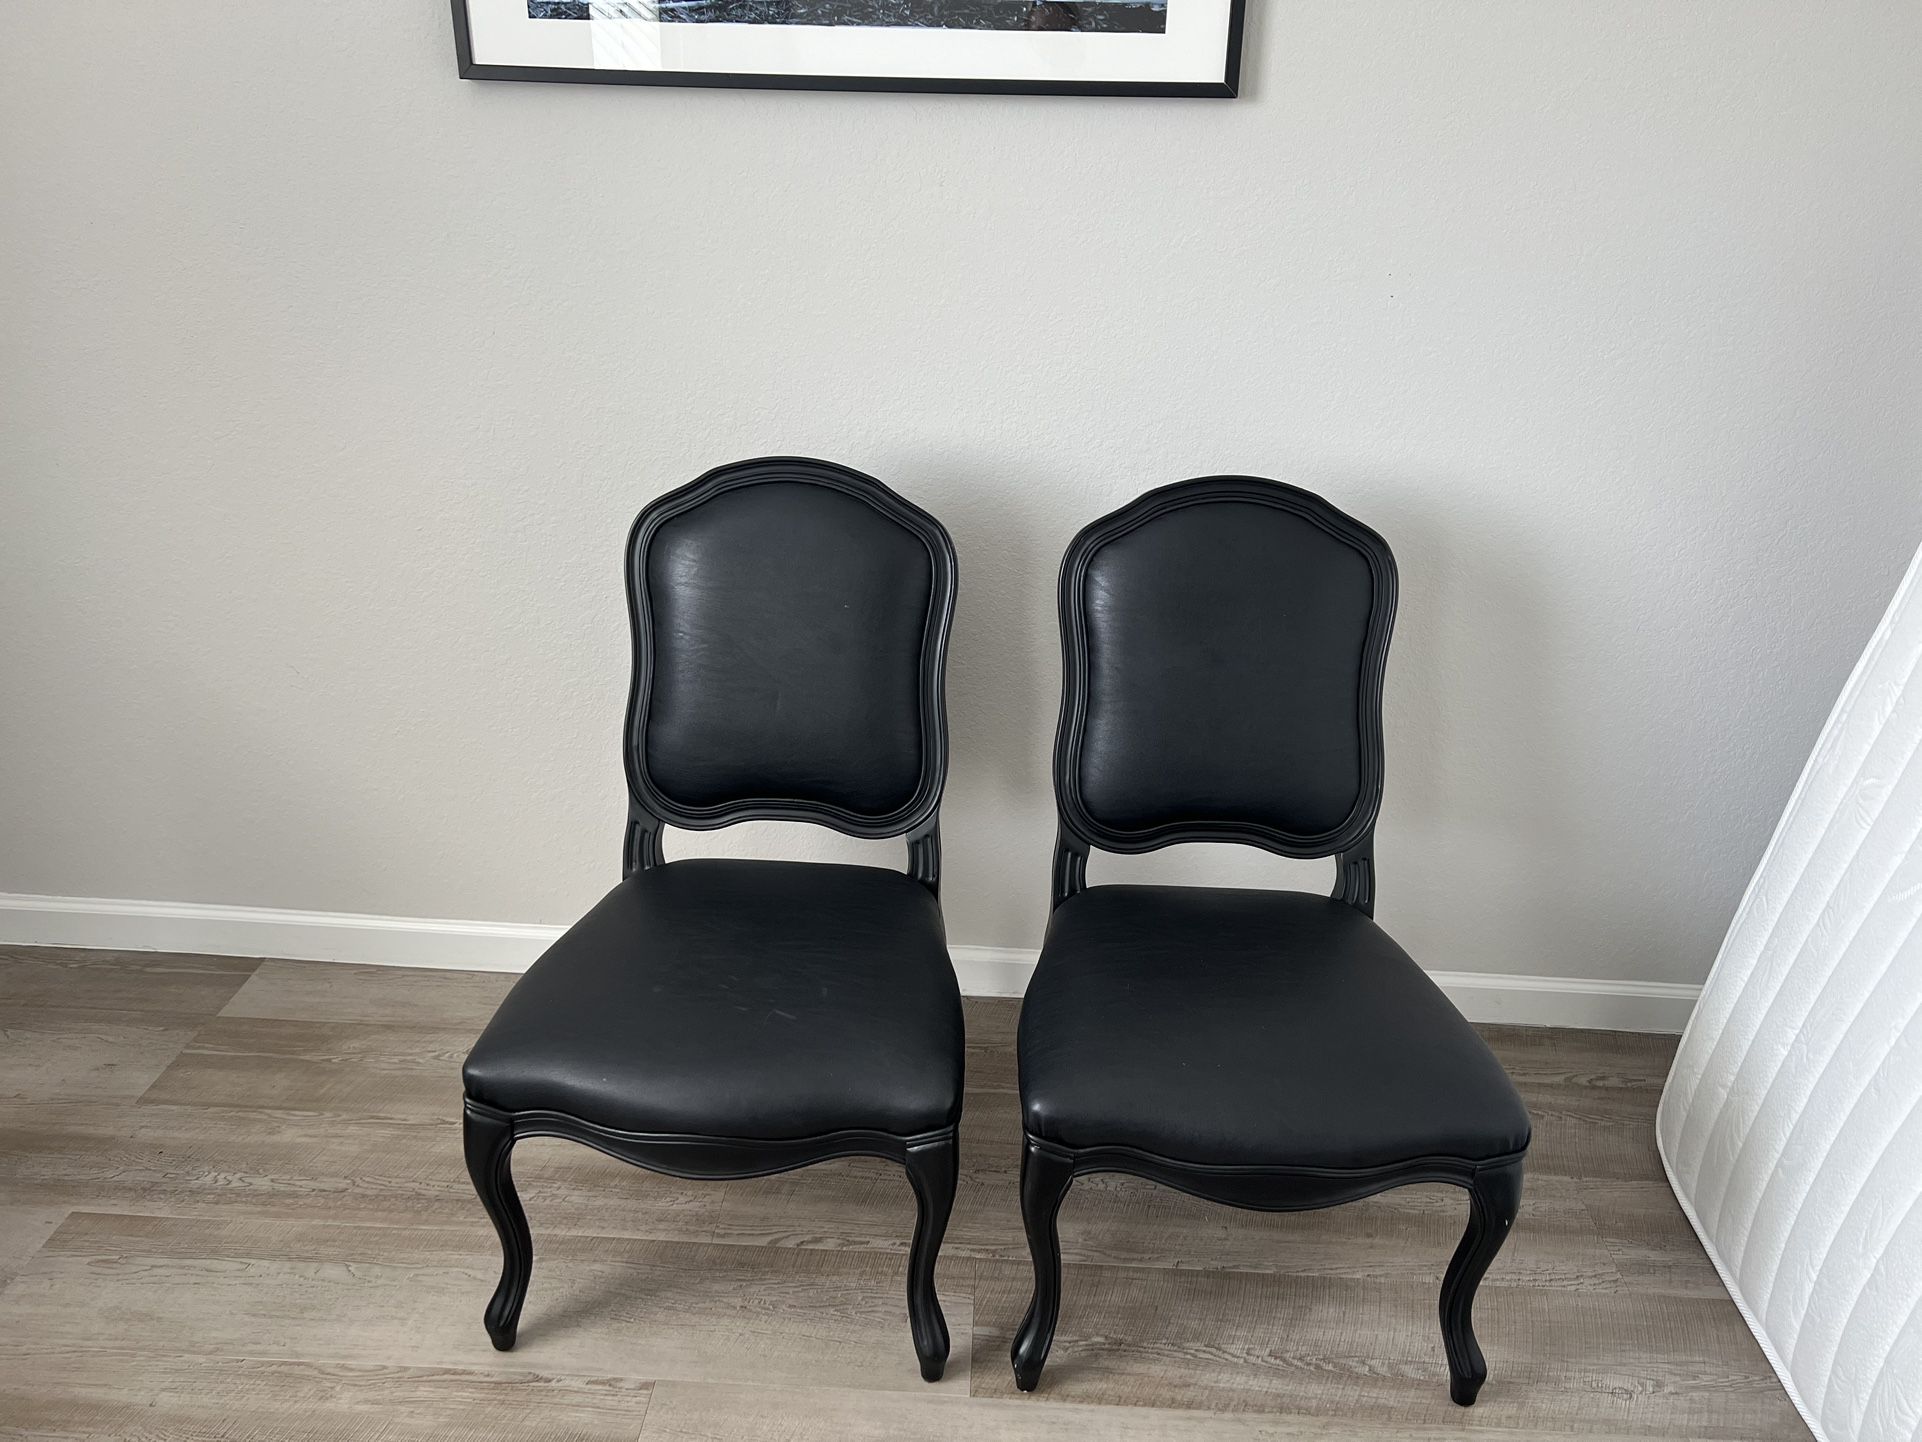 Crate & Barrel dining chairs